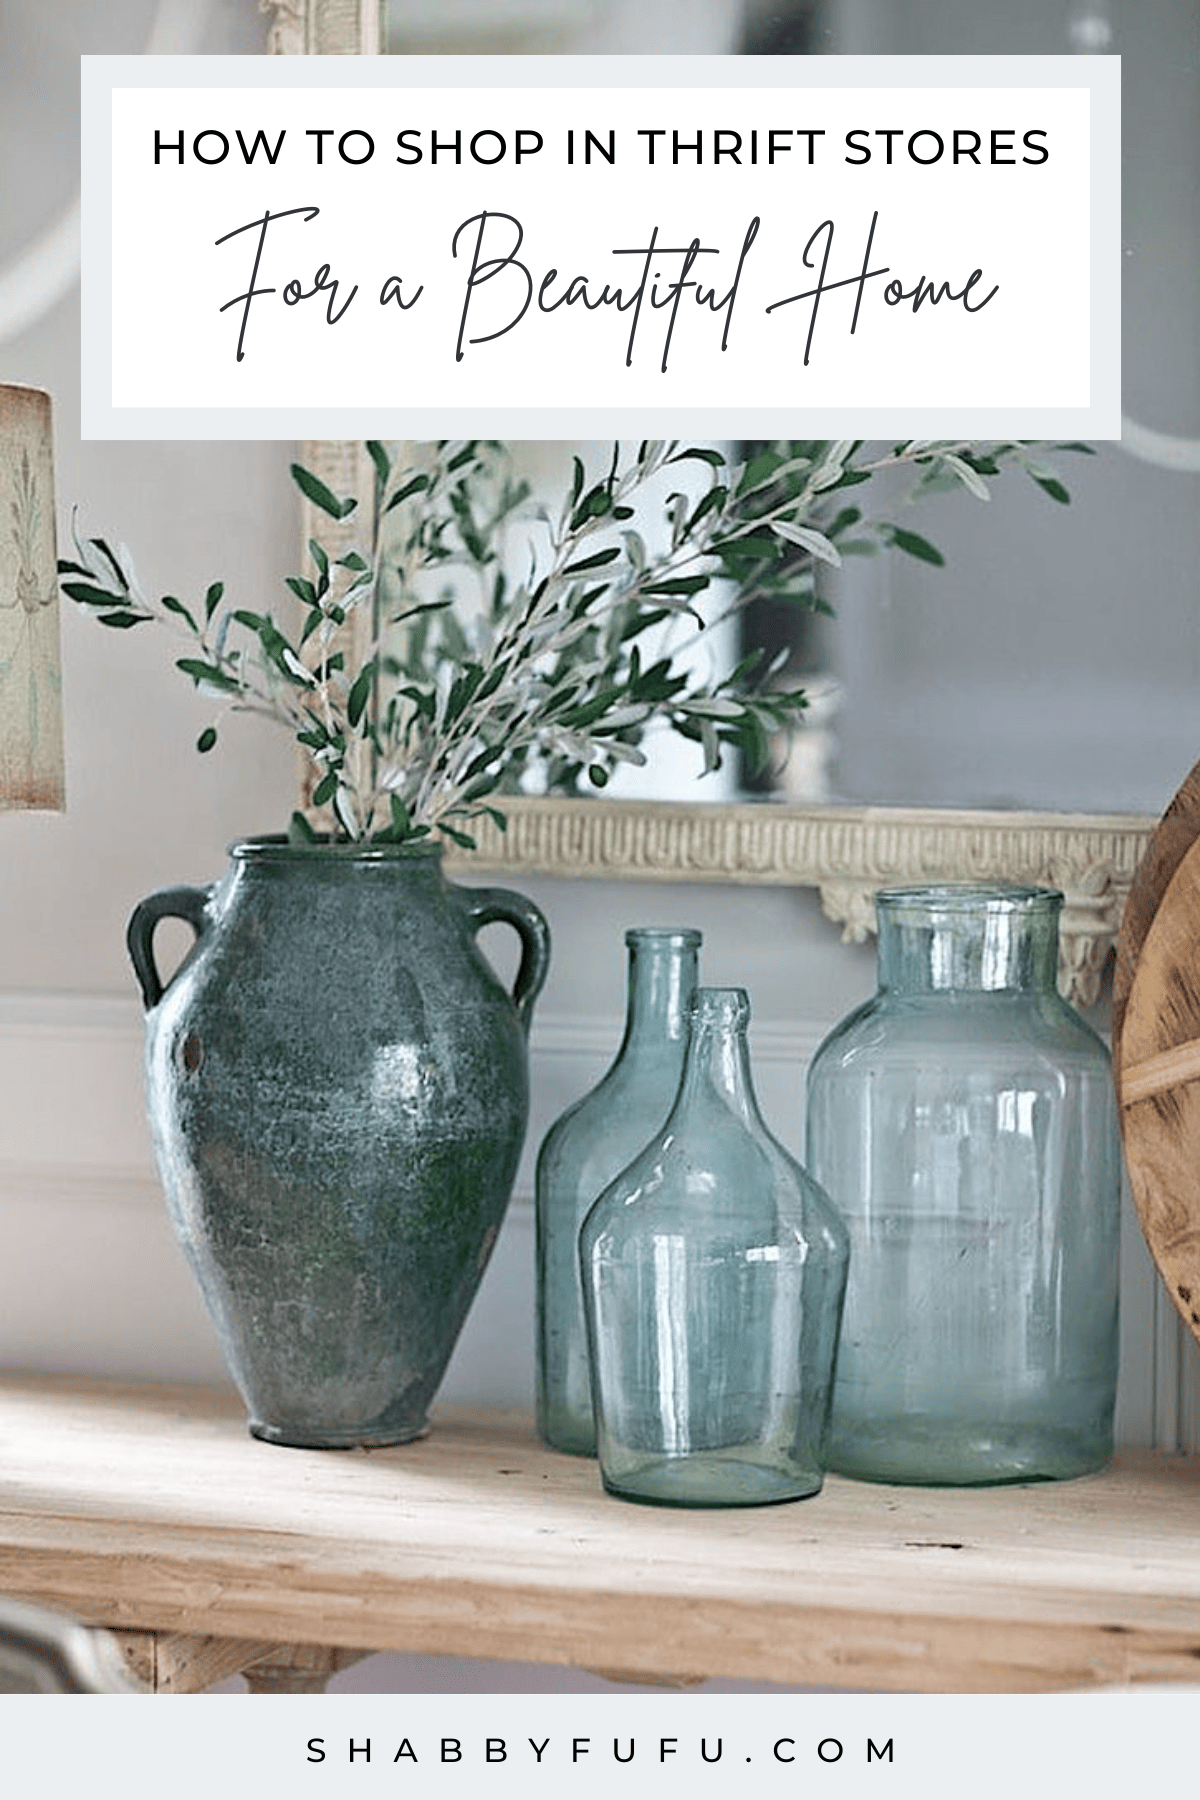 Pinterest image with the text "How To Shop In Thrift Stores For a Beautiful  Home" featuring glass and ceramic vases with dried eucalyptus stems.